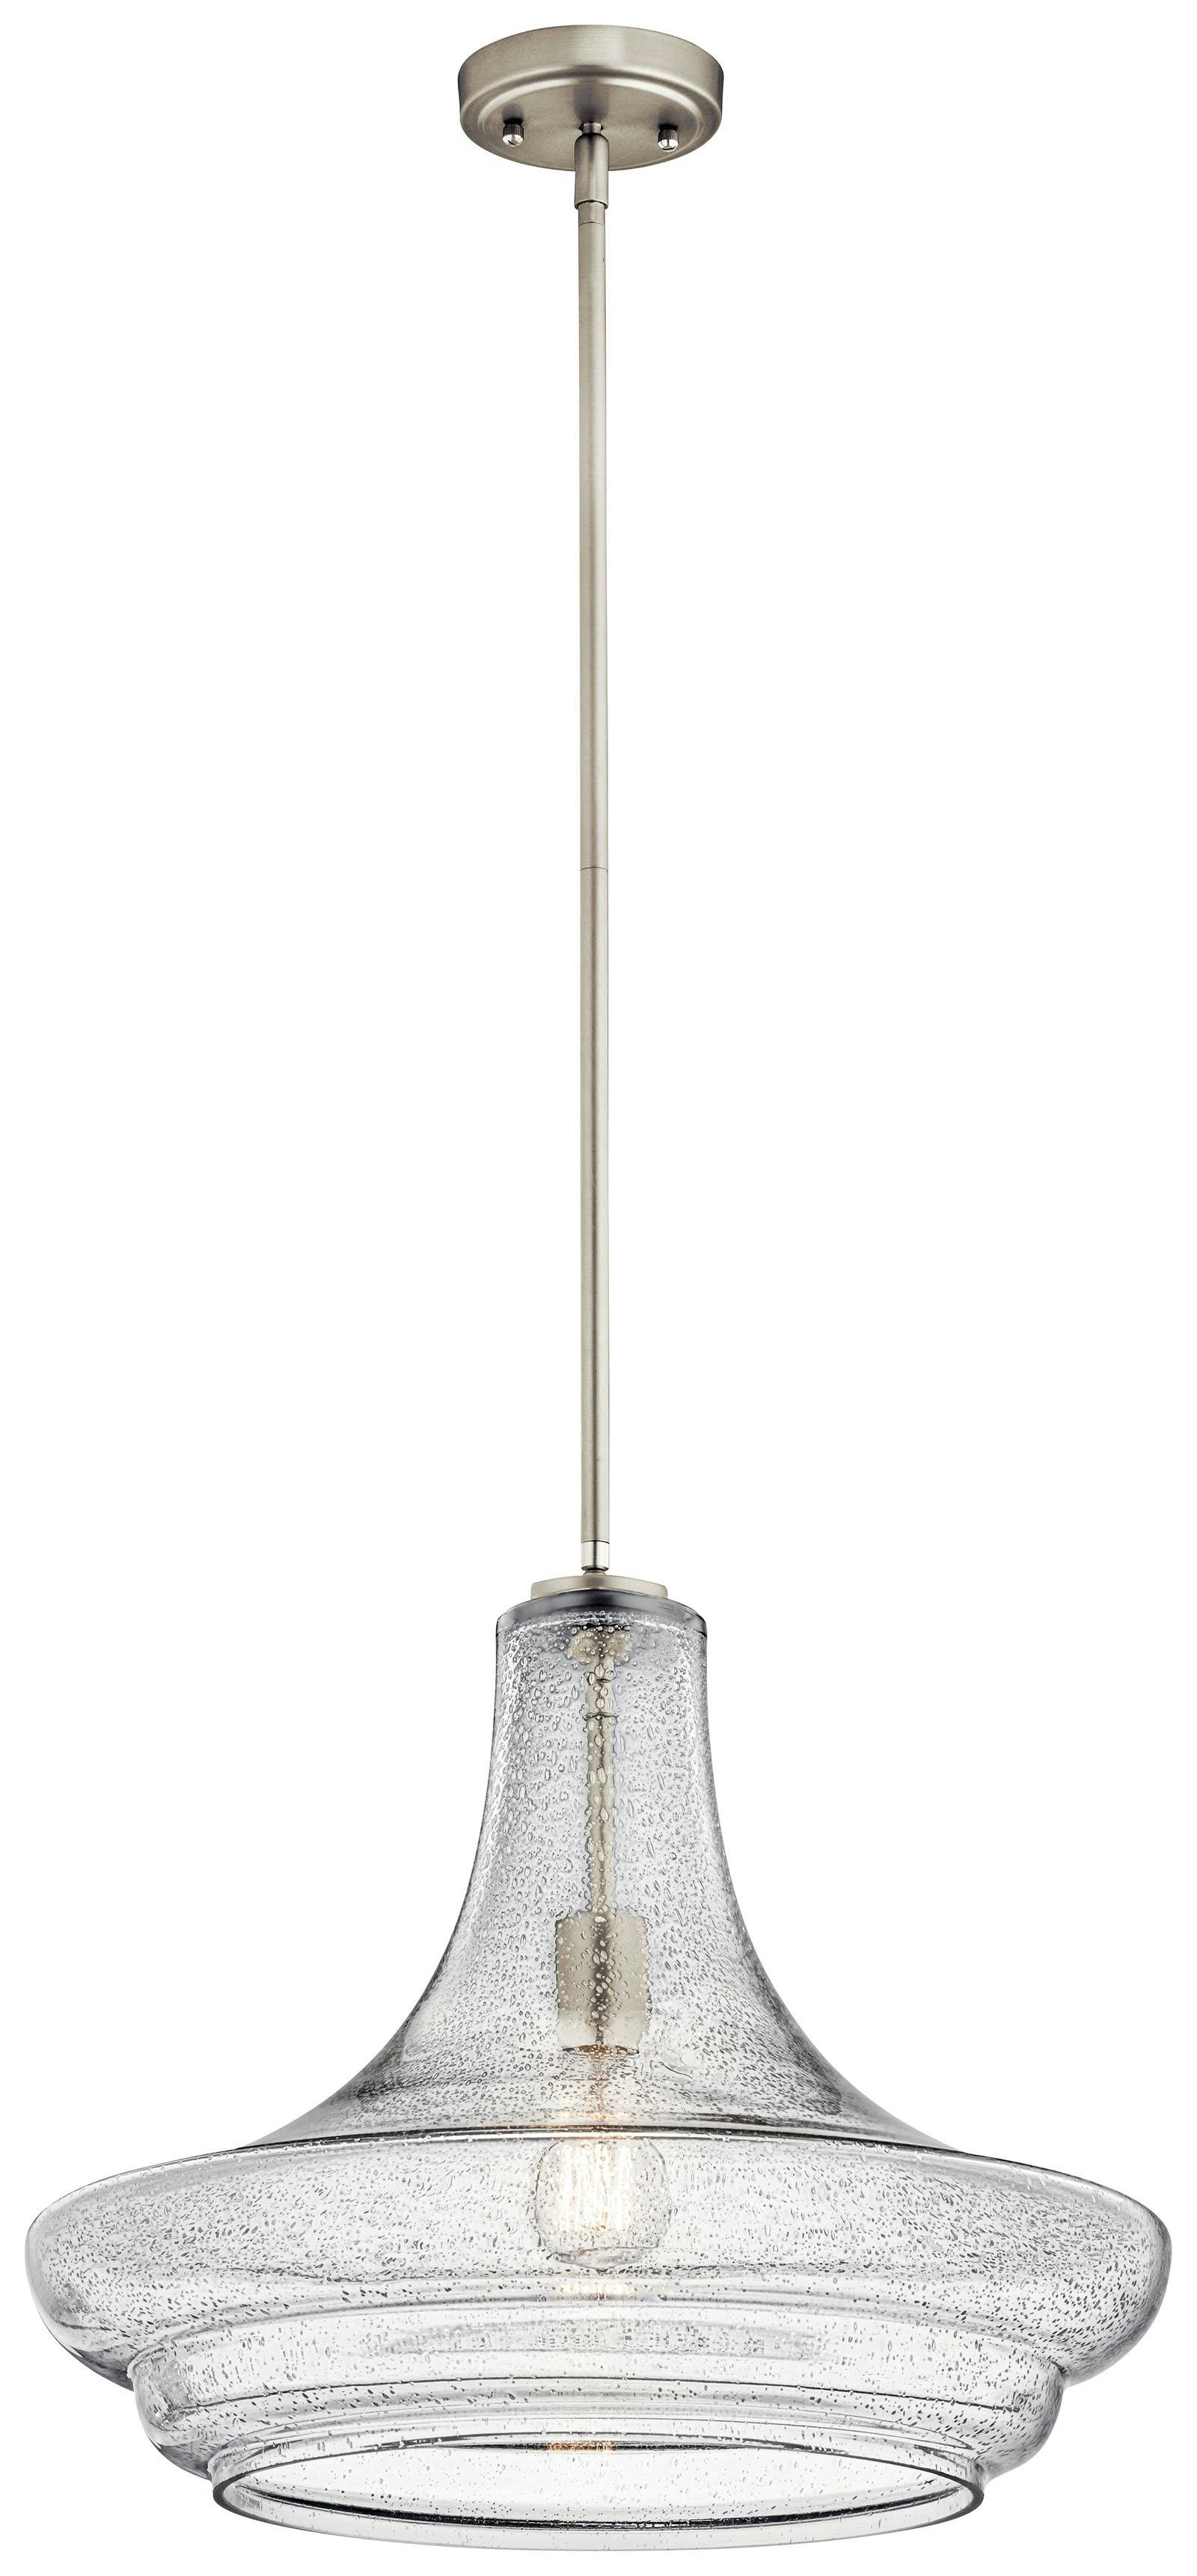 Everly 1 Light Pendant in Nickel on a white background